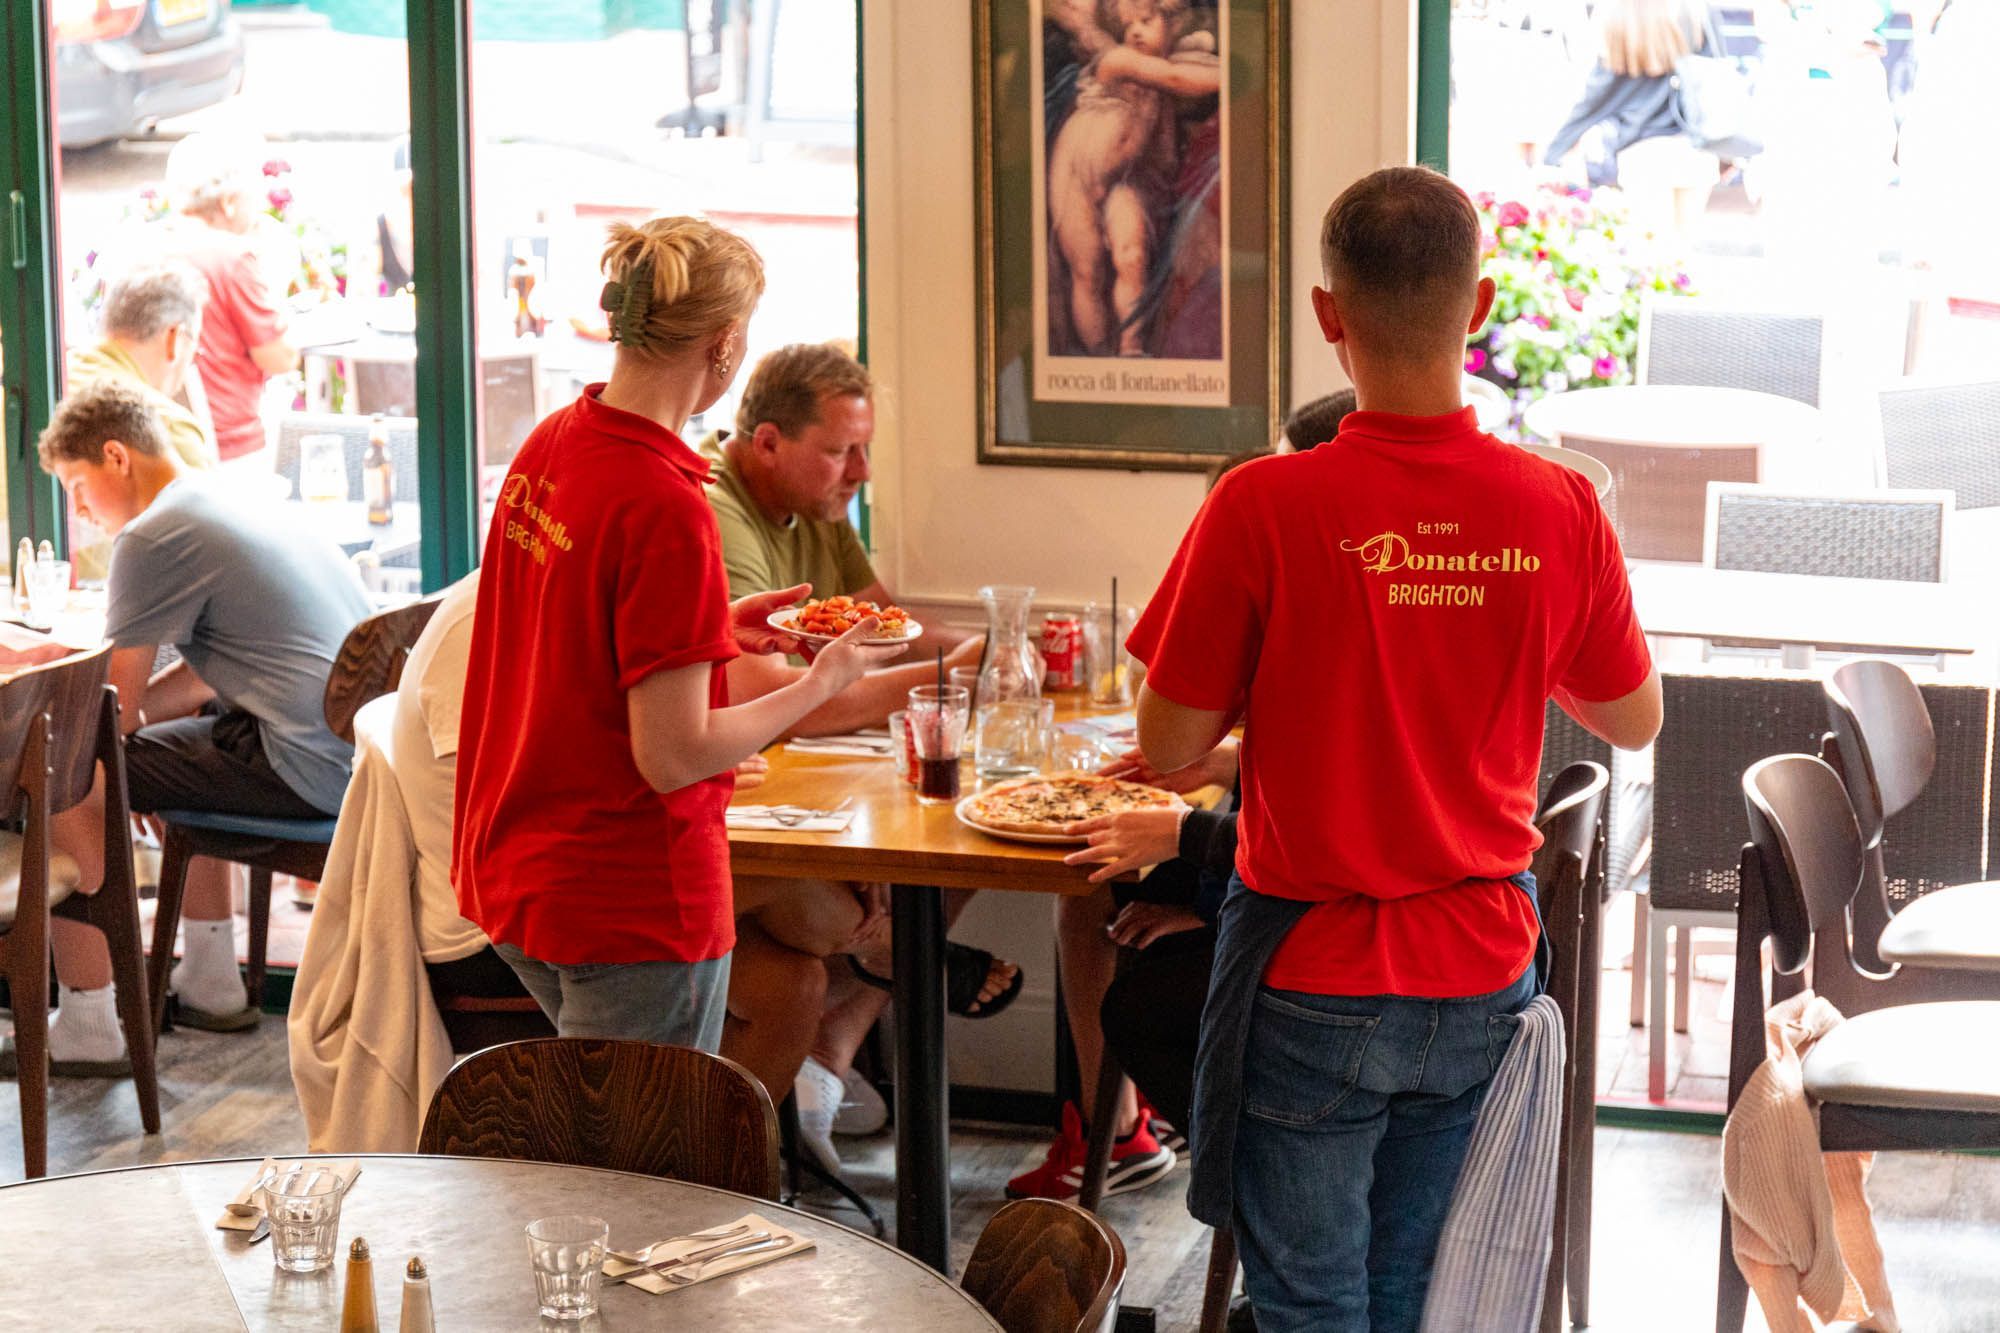 Donatello Brighton staff in red t shirts serving customers